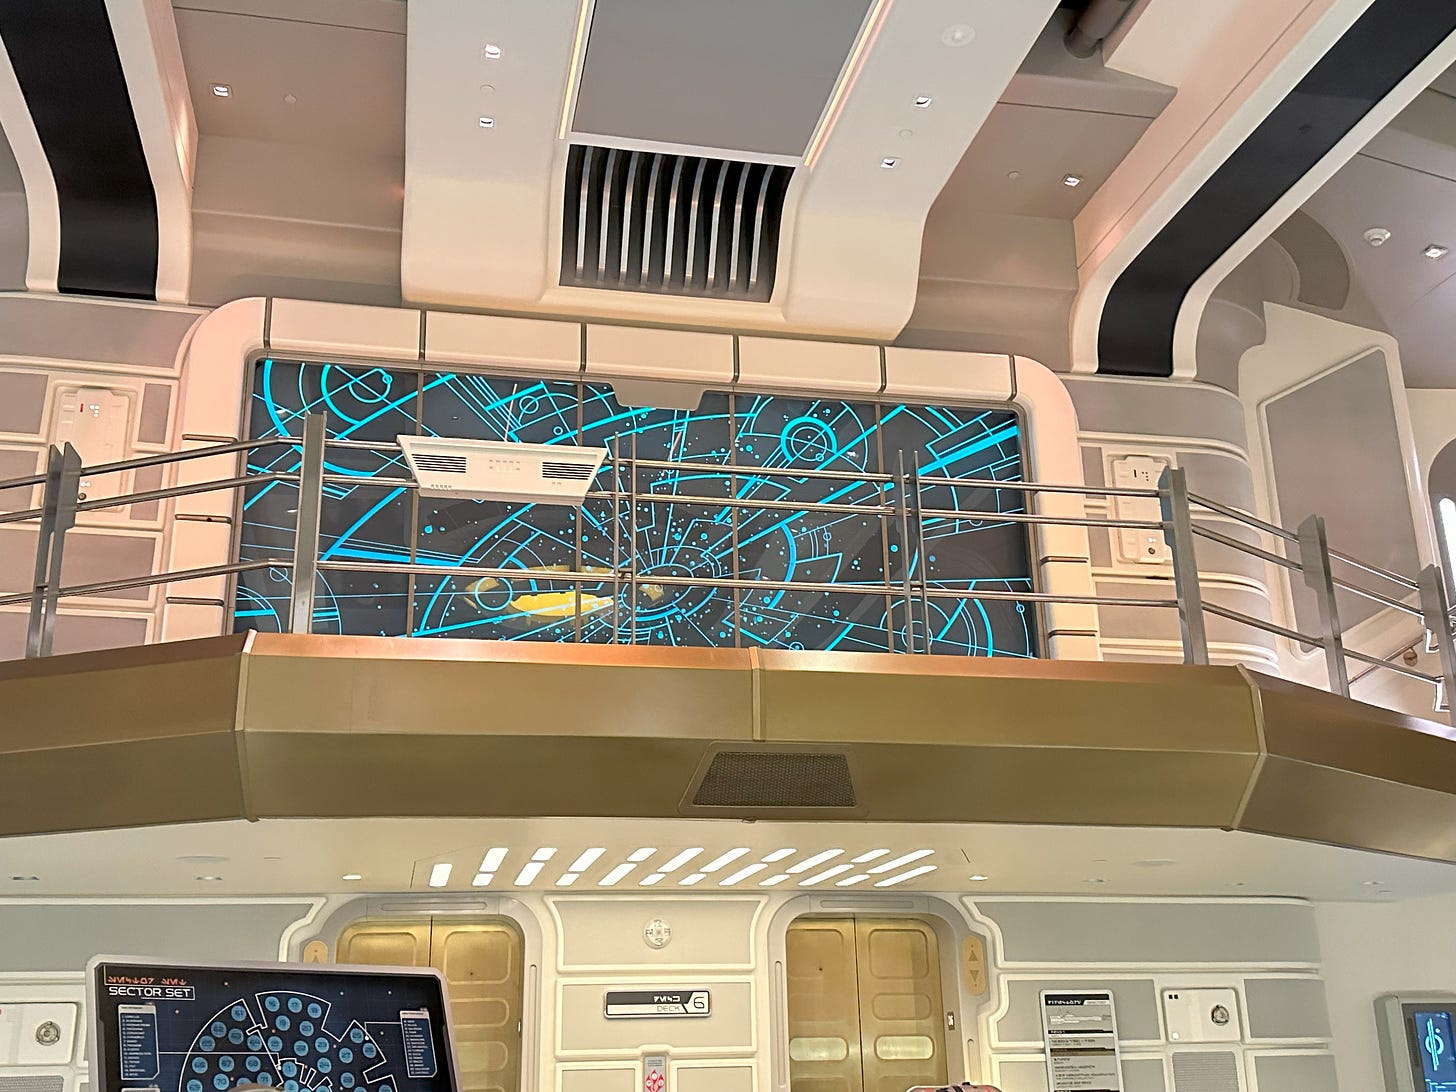 Atrium of the Halcyon starcruiser, with an upper level with silver railings, behind it a star map of the galaxy